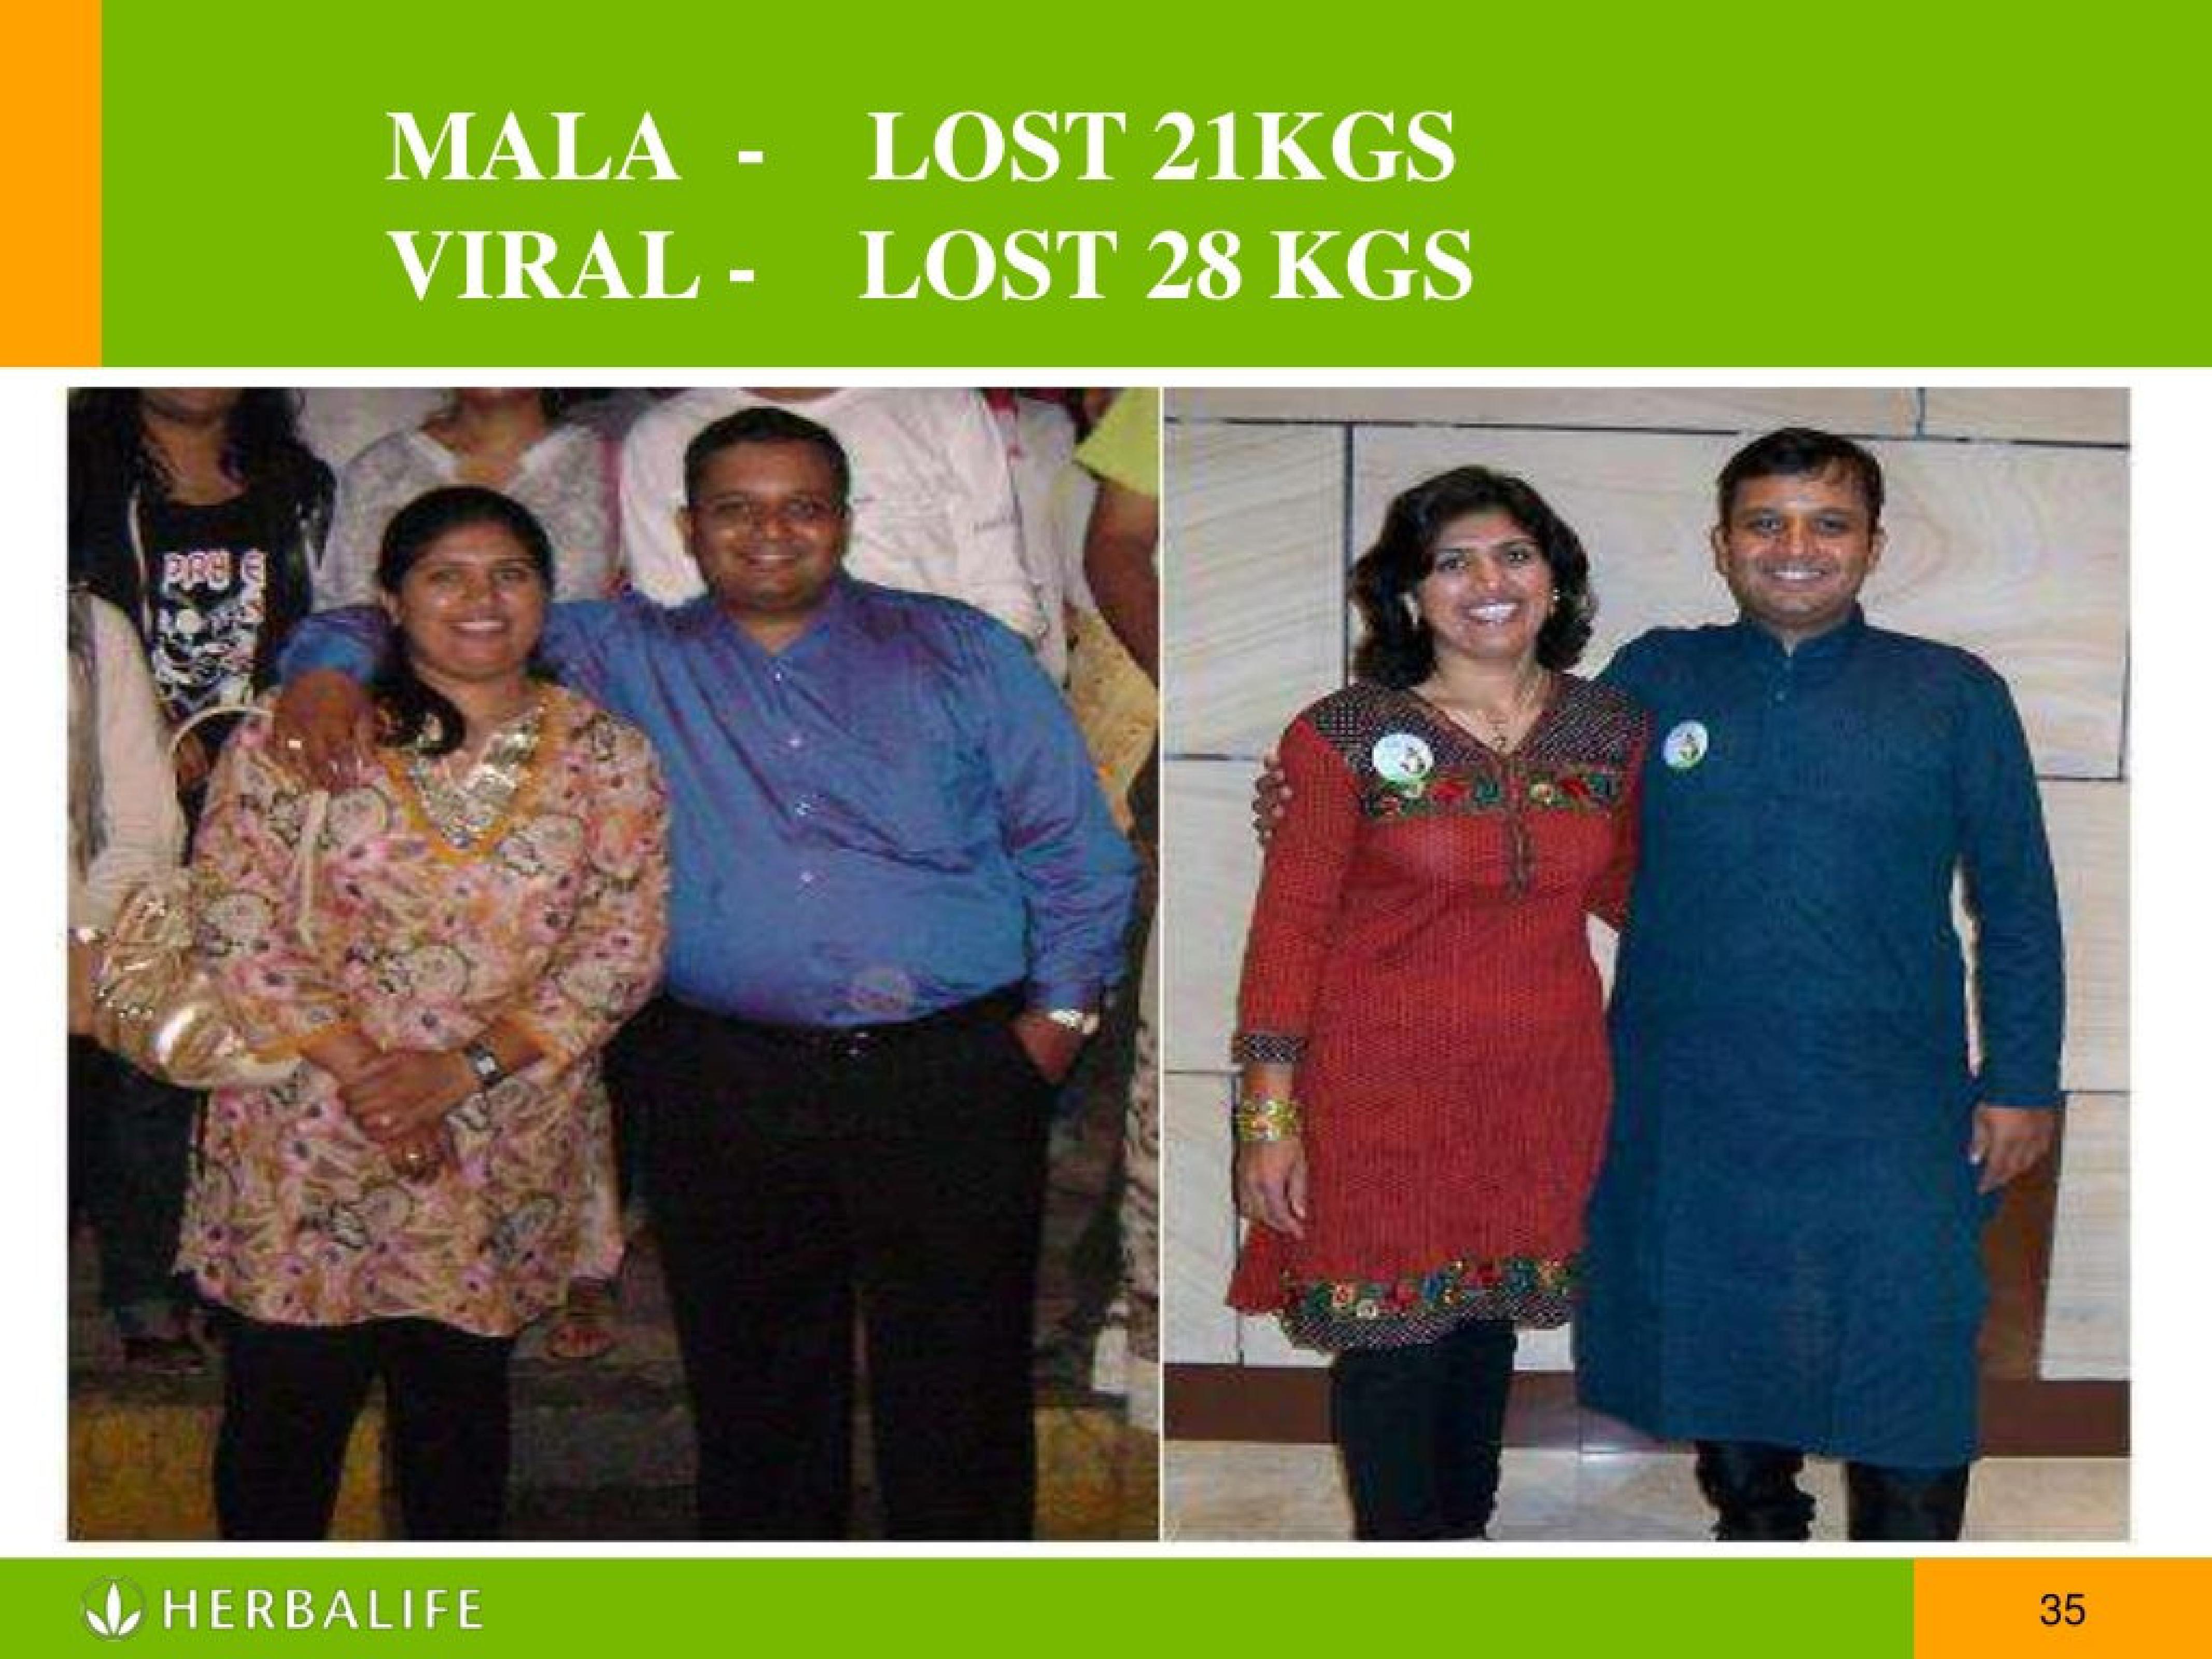 Herbalife Saidabad Hyderabad 9160255159,Hyderabad,Services,Free Classifieds,Post Free Ads,77traders.com